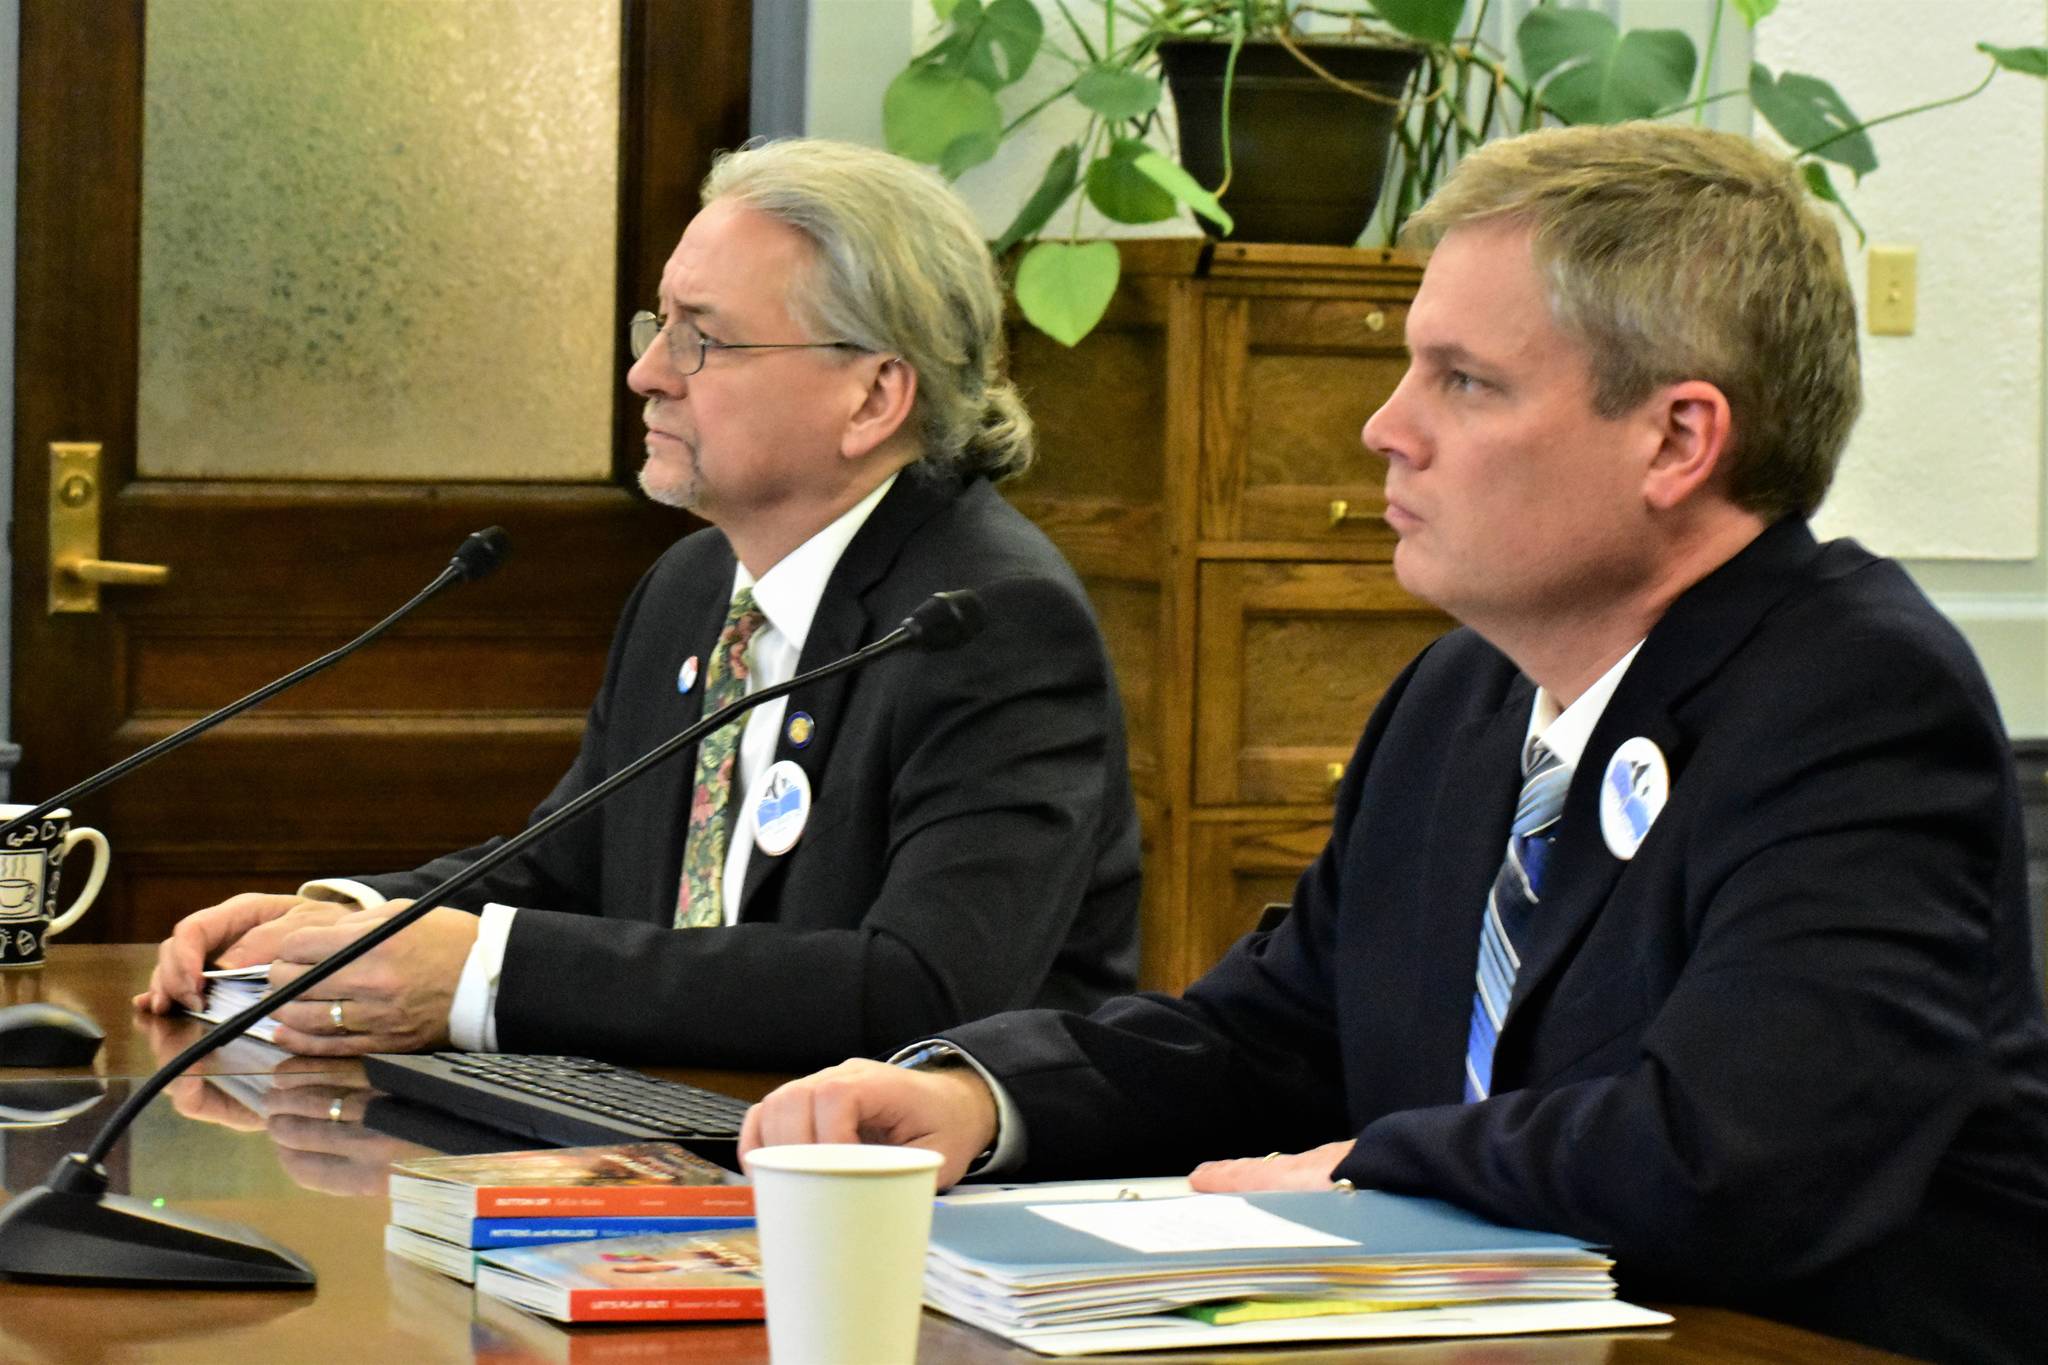 Sen. Tom Begich, D-Anchorage, left, and Education Commissioner Michael Johnson at a answer questions about the Alaska Reads Act at a Senate Education Committee meeting on Thursday, Jan. 23, 2020. (Peter Segall | Juneau Empire)